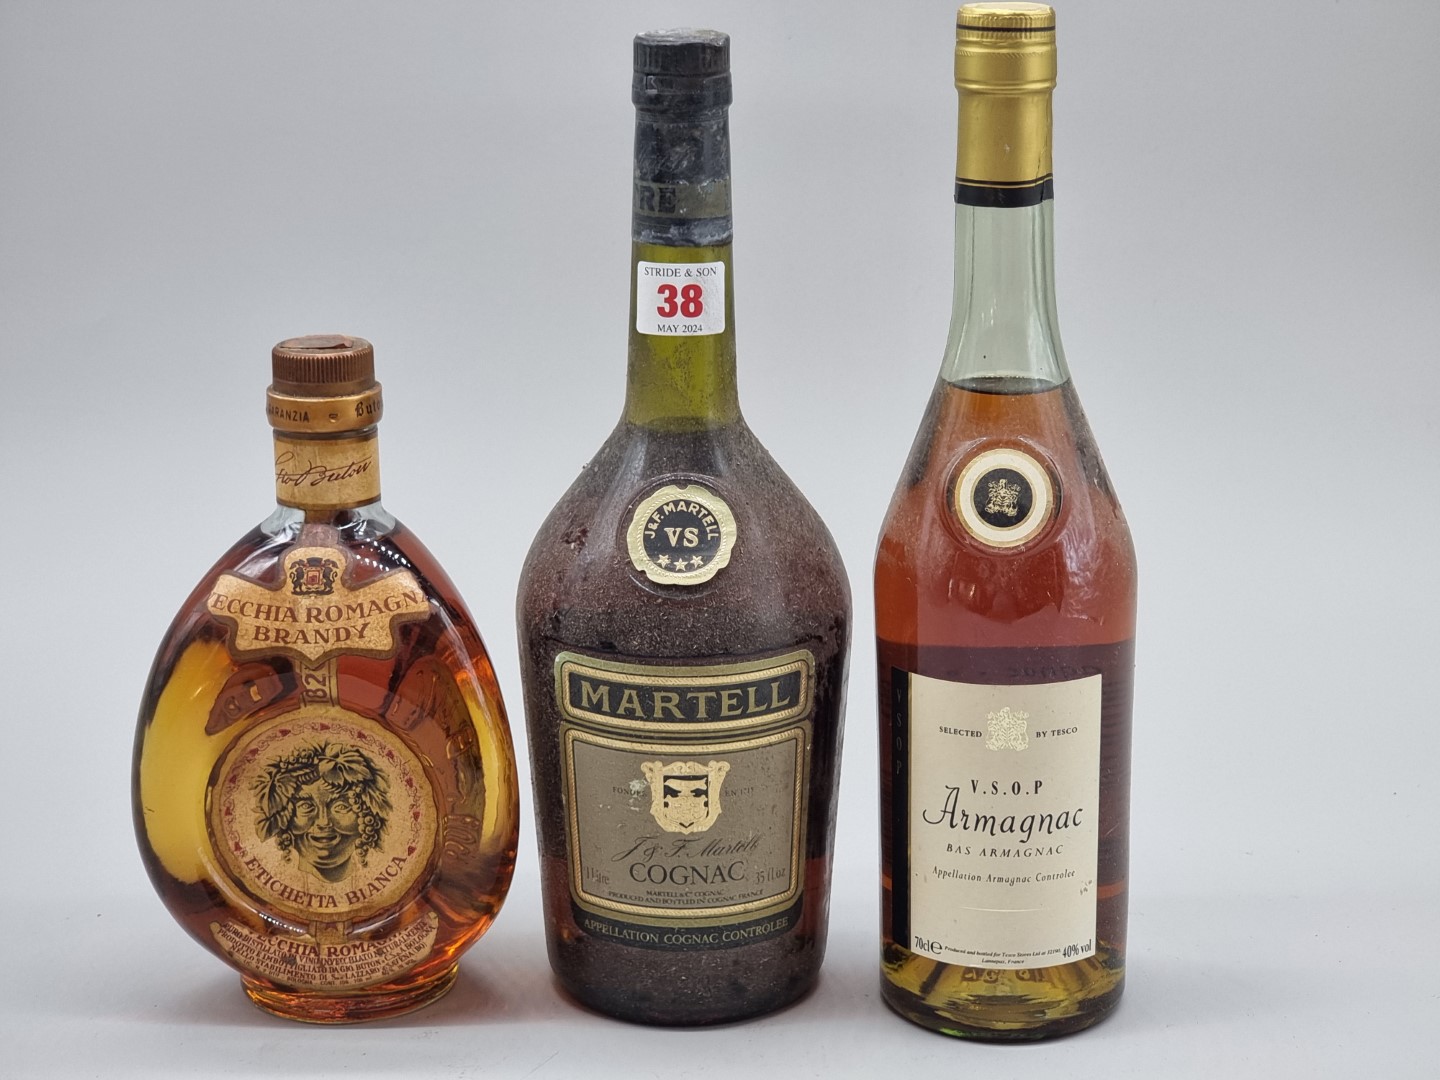 A 1 litre bottle of Martell VS Cognac; together with a 70cl bottle of VSOP Armagnac; and a 70cl